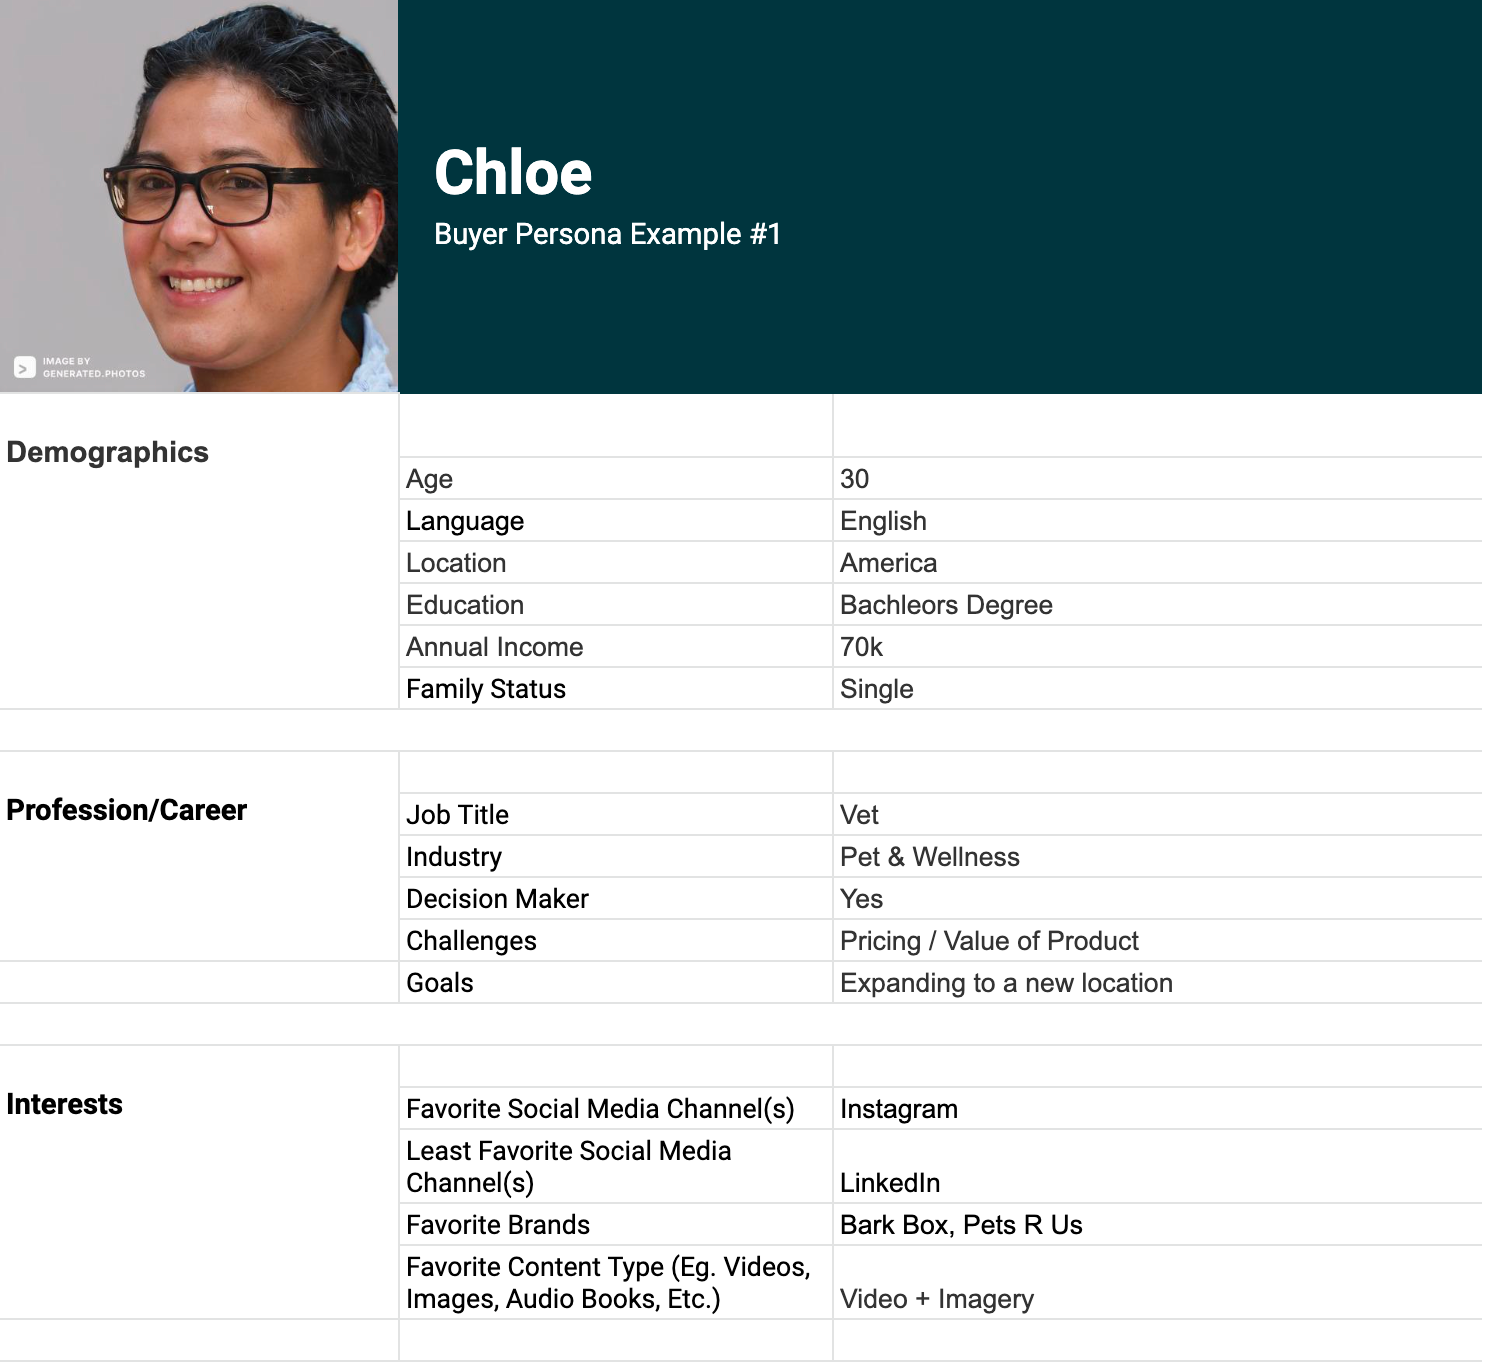 A screenshot of the downloadable buyer persona template with the profile filled in for our example Chloe: age 30, speaks English, lives in America, has a bachelor's degree, earns 70k a year, is single, works as a veterinarian in the pet and wellness industry, is the primary purchase decision maker, her biggest challenge is balancing pricing and thevalue of the product, her goal is to expand to a new location, her favorite social media channel is Instagram and least favorite is LinkedIn, her favorite brands are Bark Box and Pets R Us, and favorite content type are video and imagery.